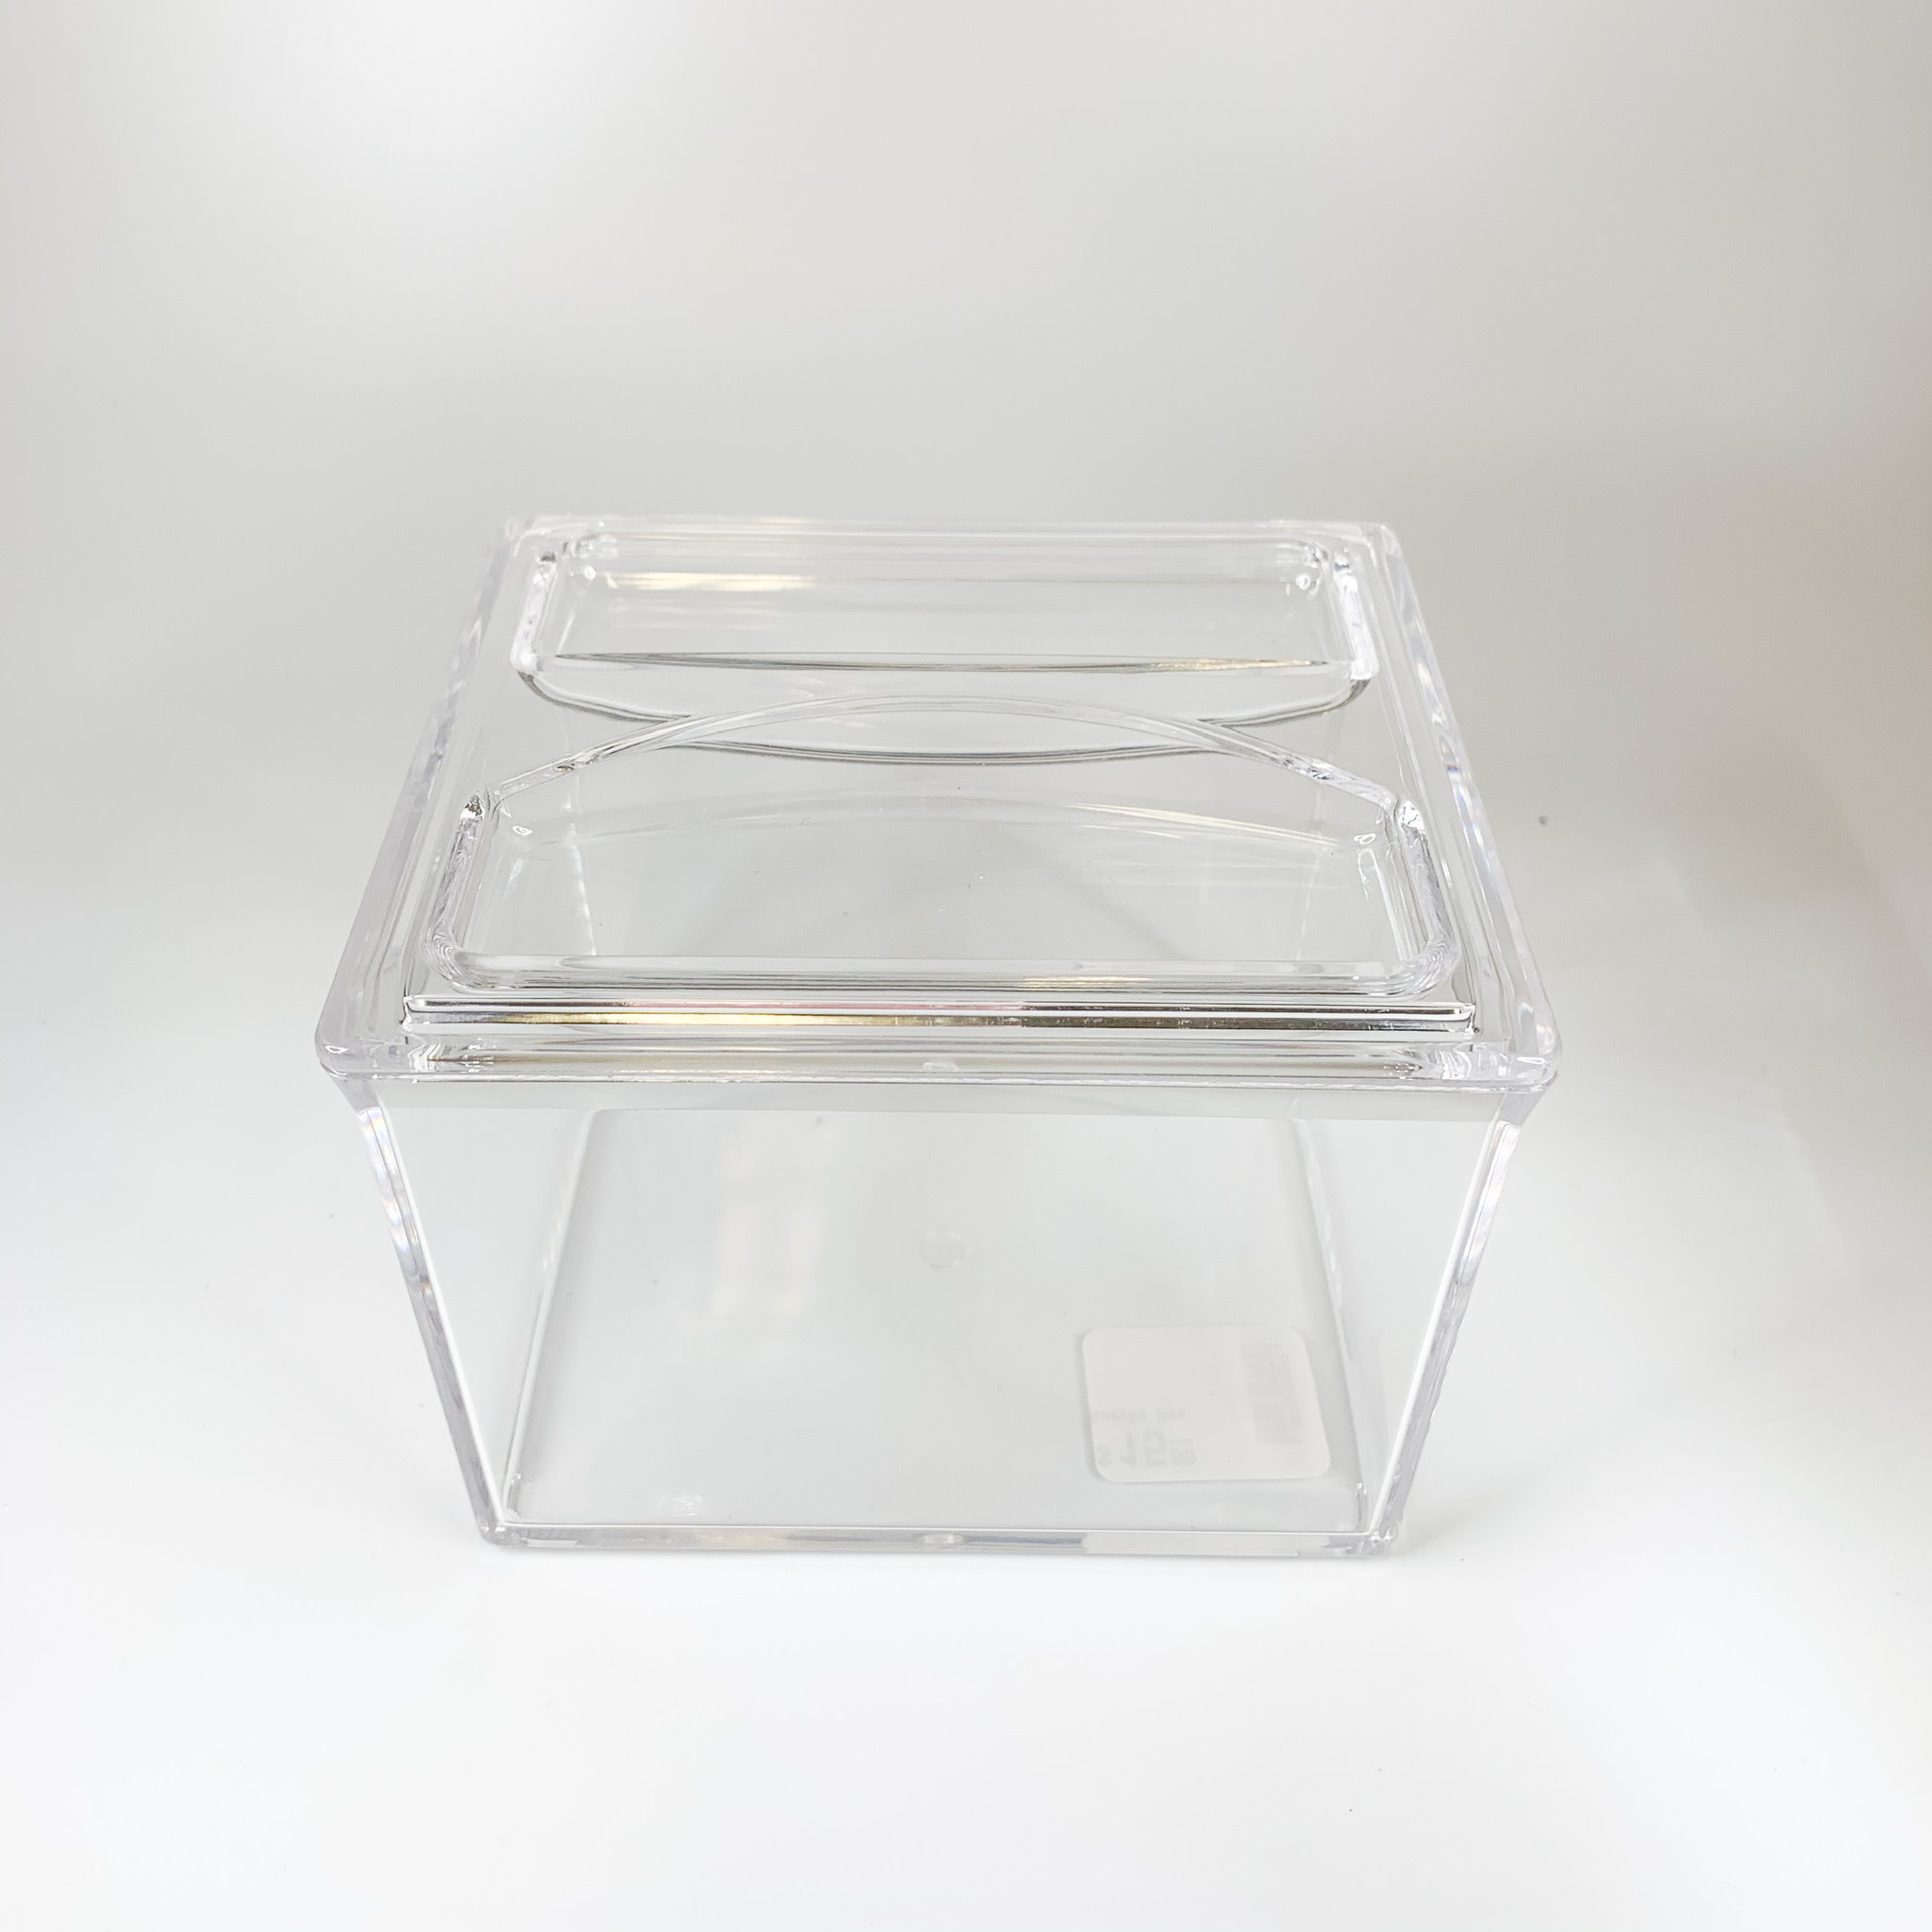 Huang Acrylic Long Acrylic Cake Tray and Cover/ Lid, Clear (17 x 6 x 3.5)